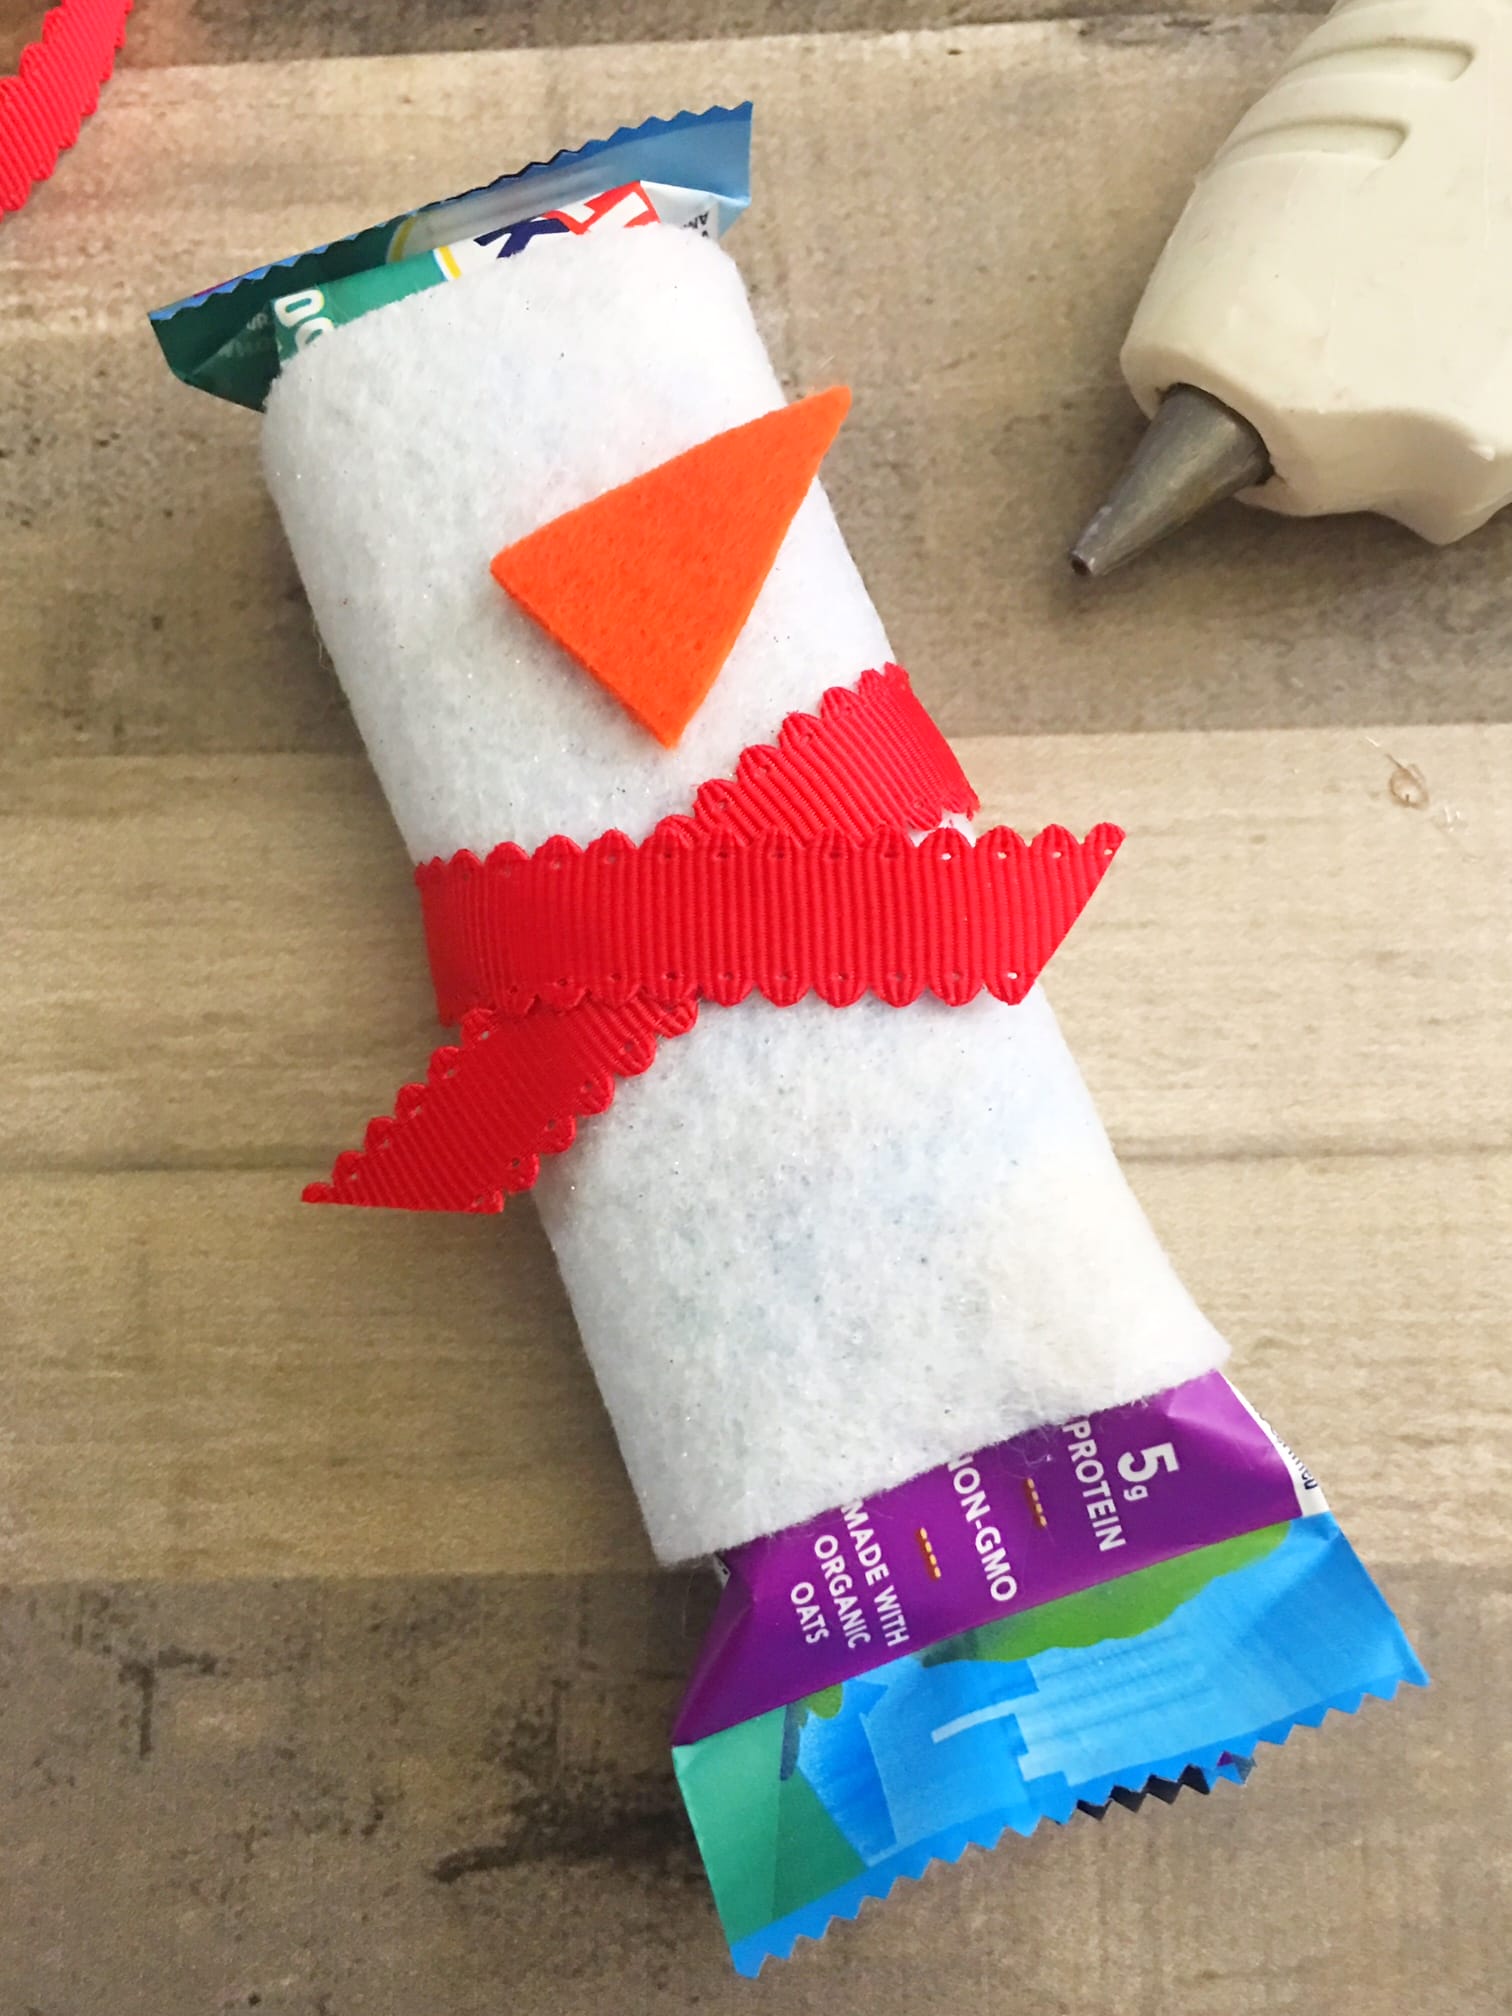  Looking for a cute way to give a stocking stuffer type present or a school treat? These Snowman Granola Bar covers are so simple to make.